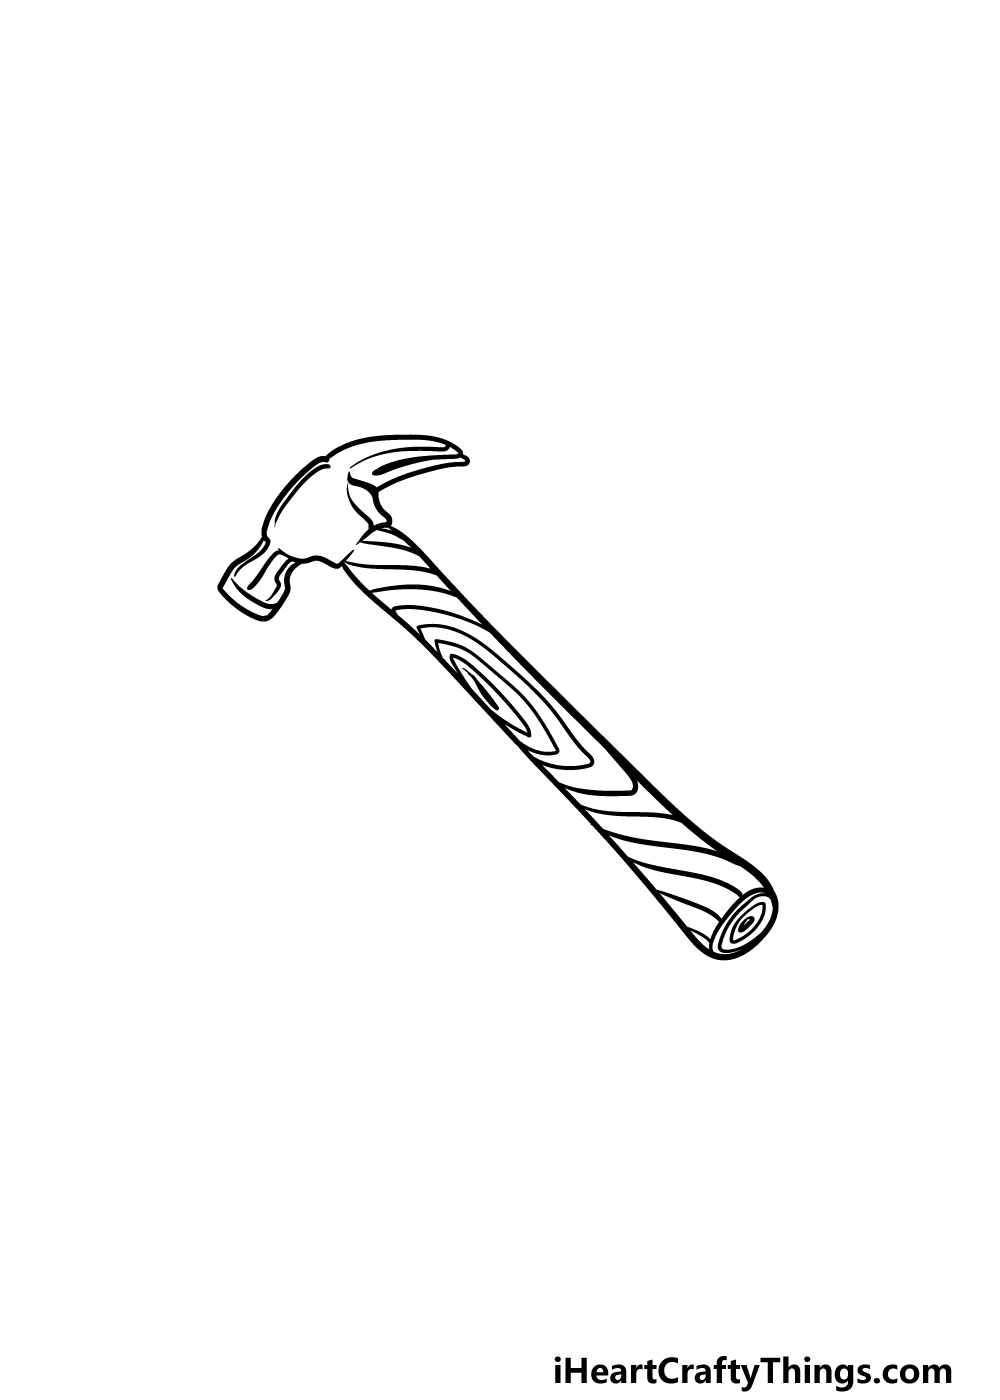 how to draw a hammer step 5